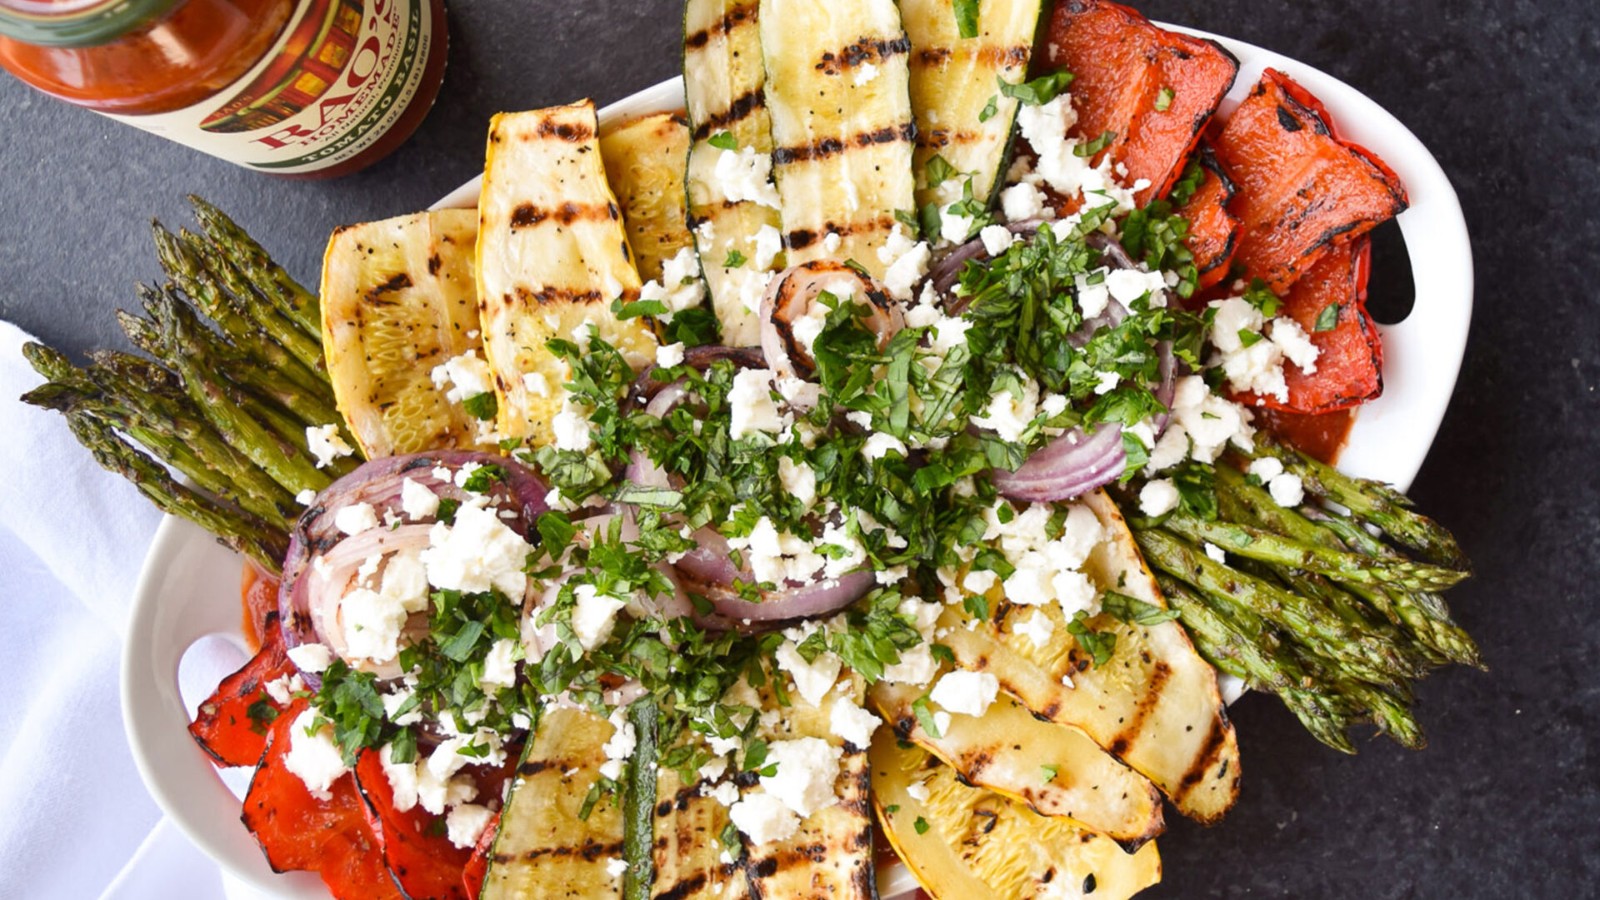 Image of Serena Wolf’s Grilled Vegetables with Tomato Basil Sauce, Feta and Herbs